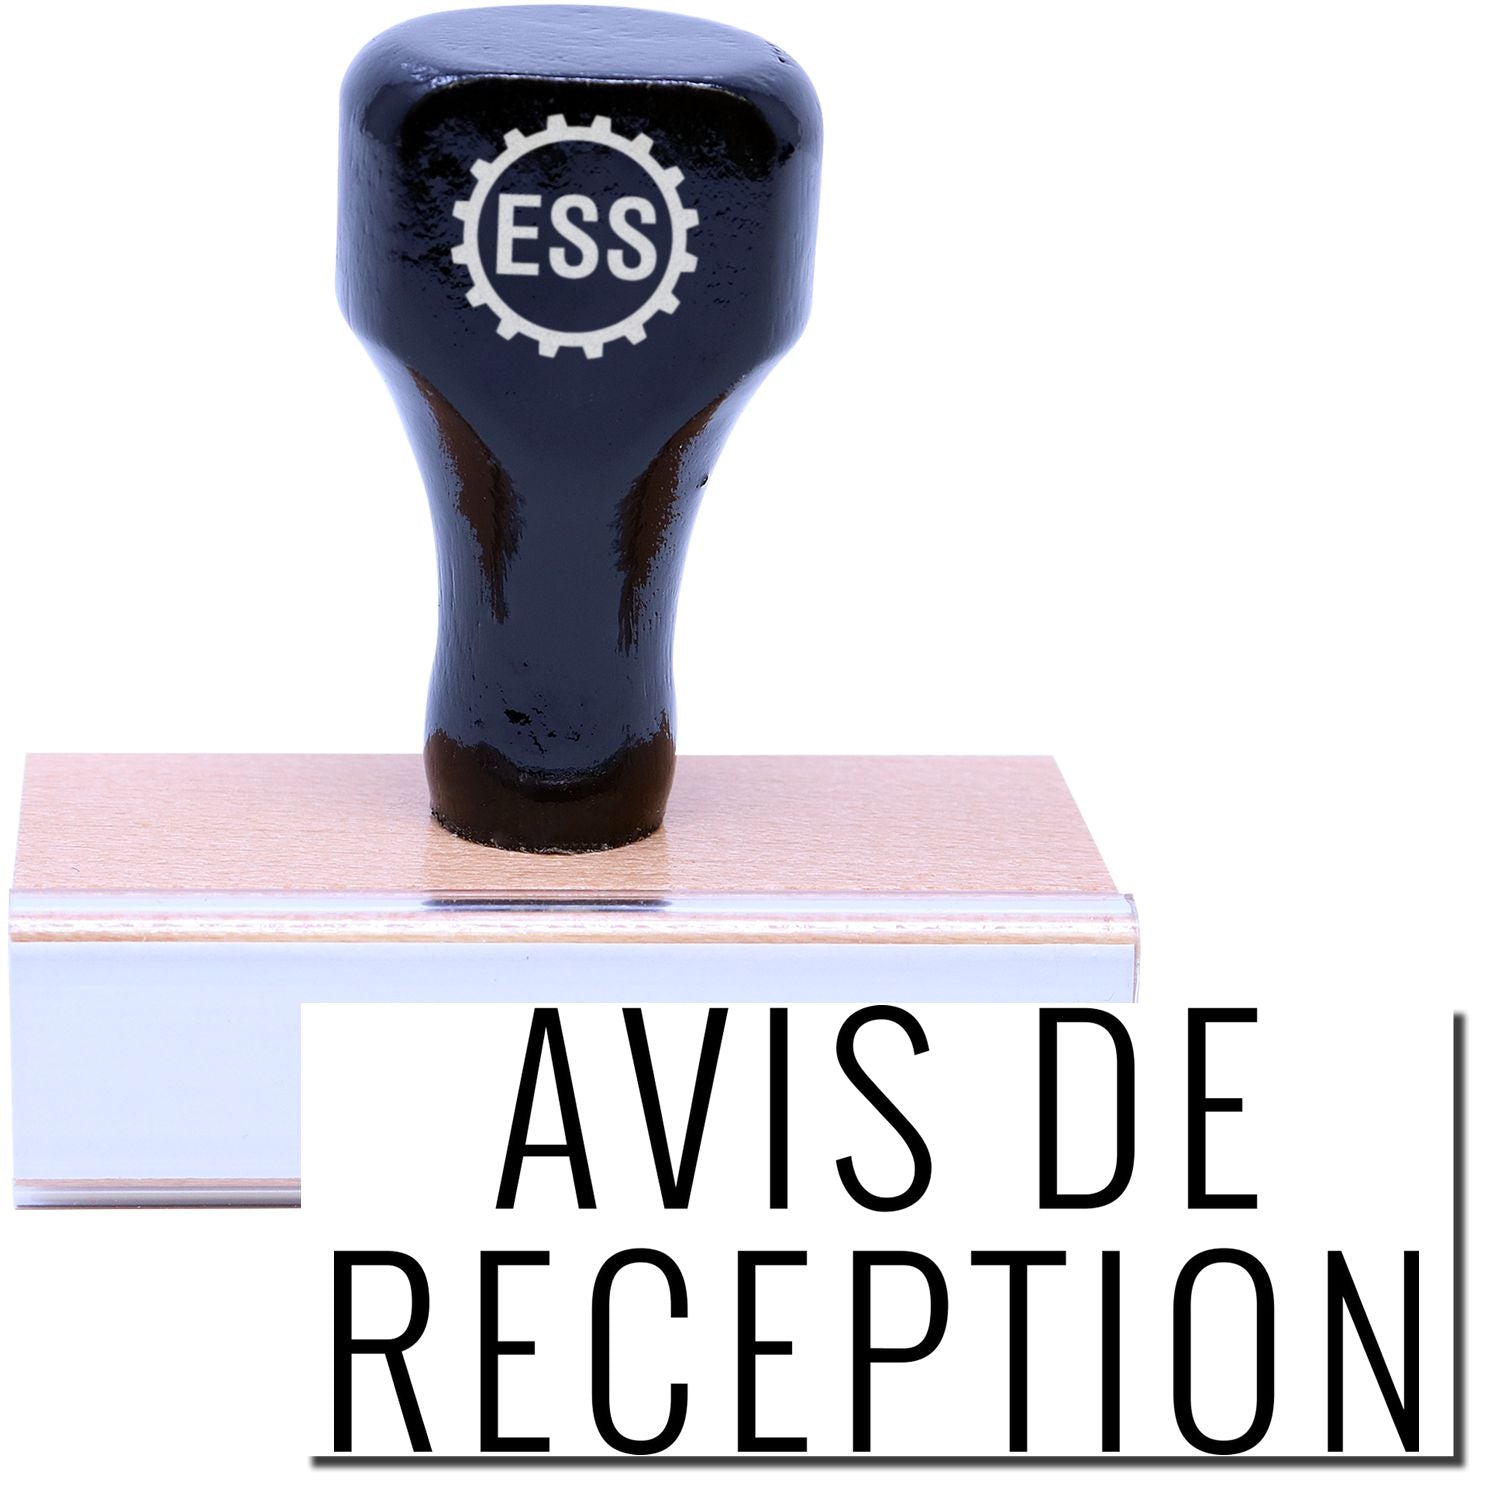 A stock office rubber stamp with a stamped image showing how the text "AVIS DE RECEPTION" is displayed after stamping.